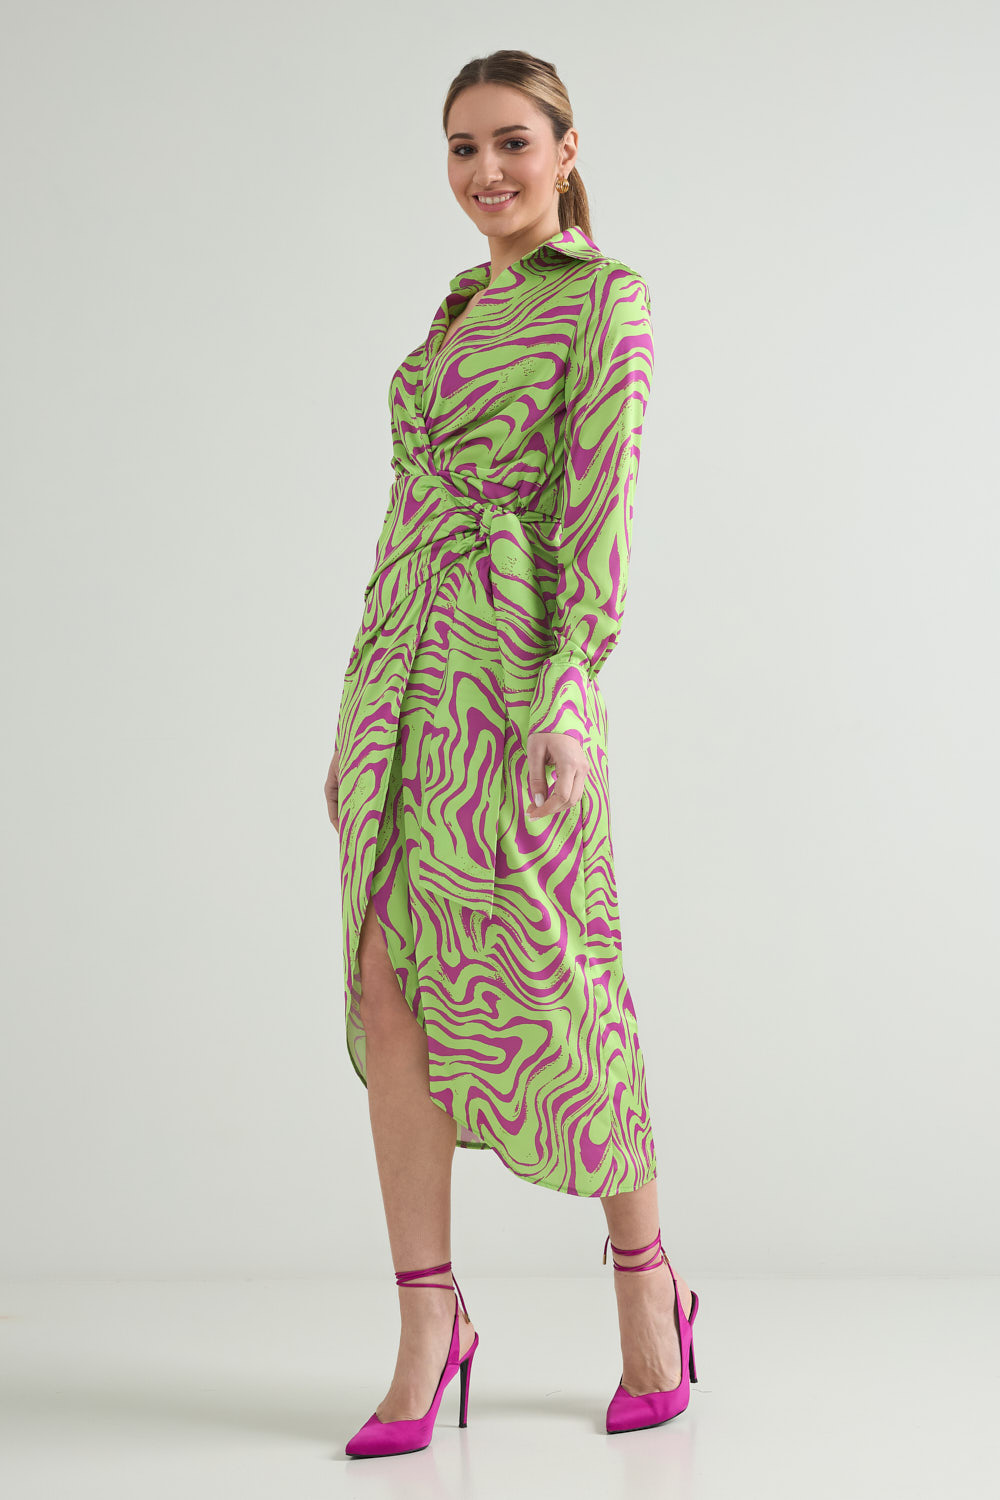 Picture of Satin printed wrap dress